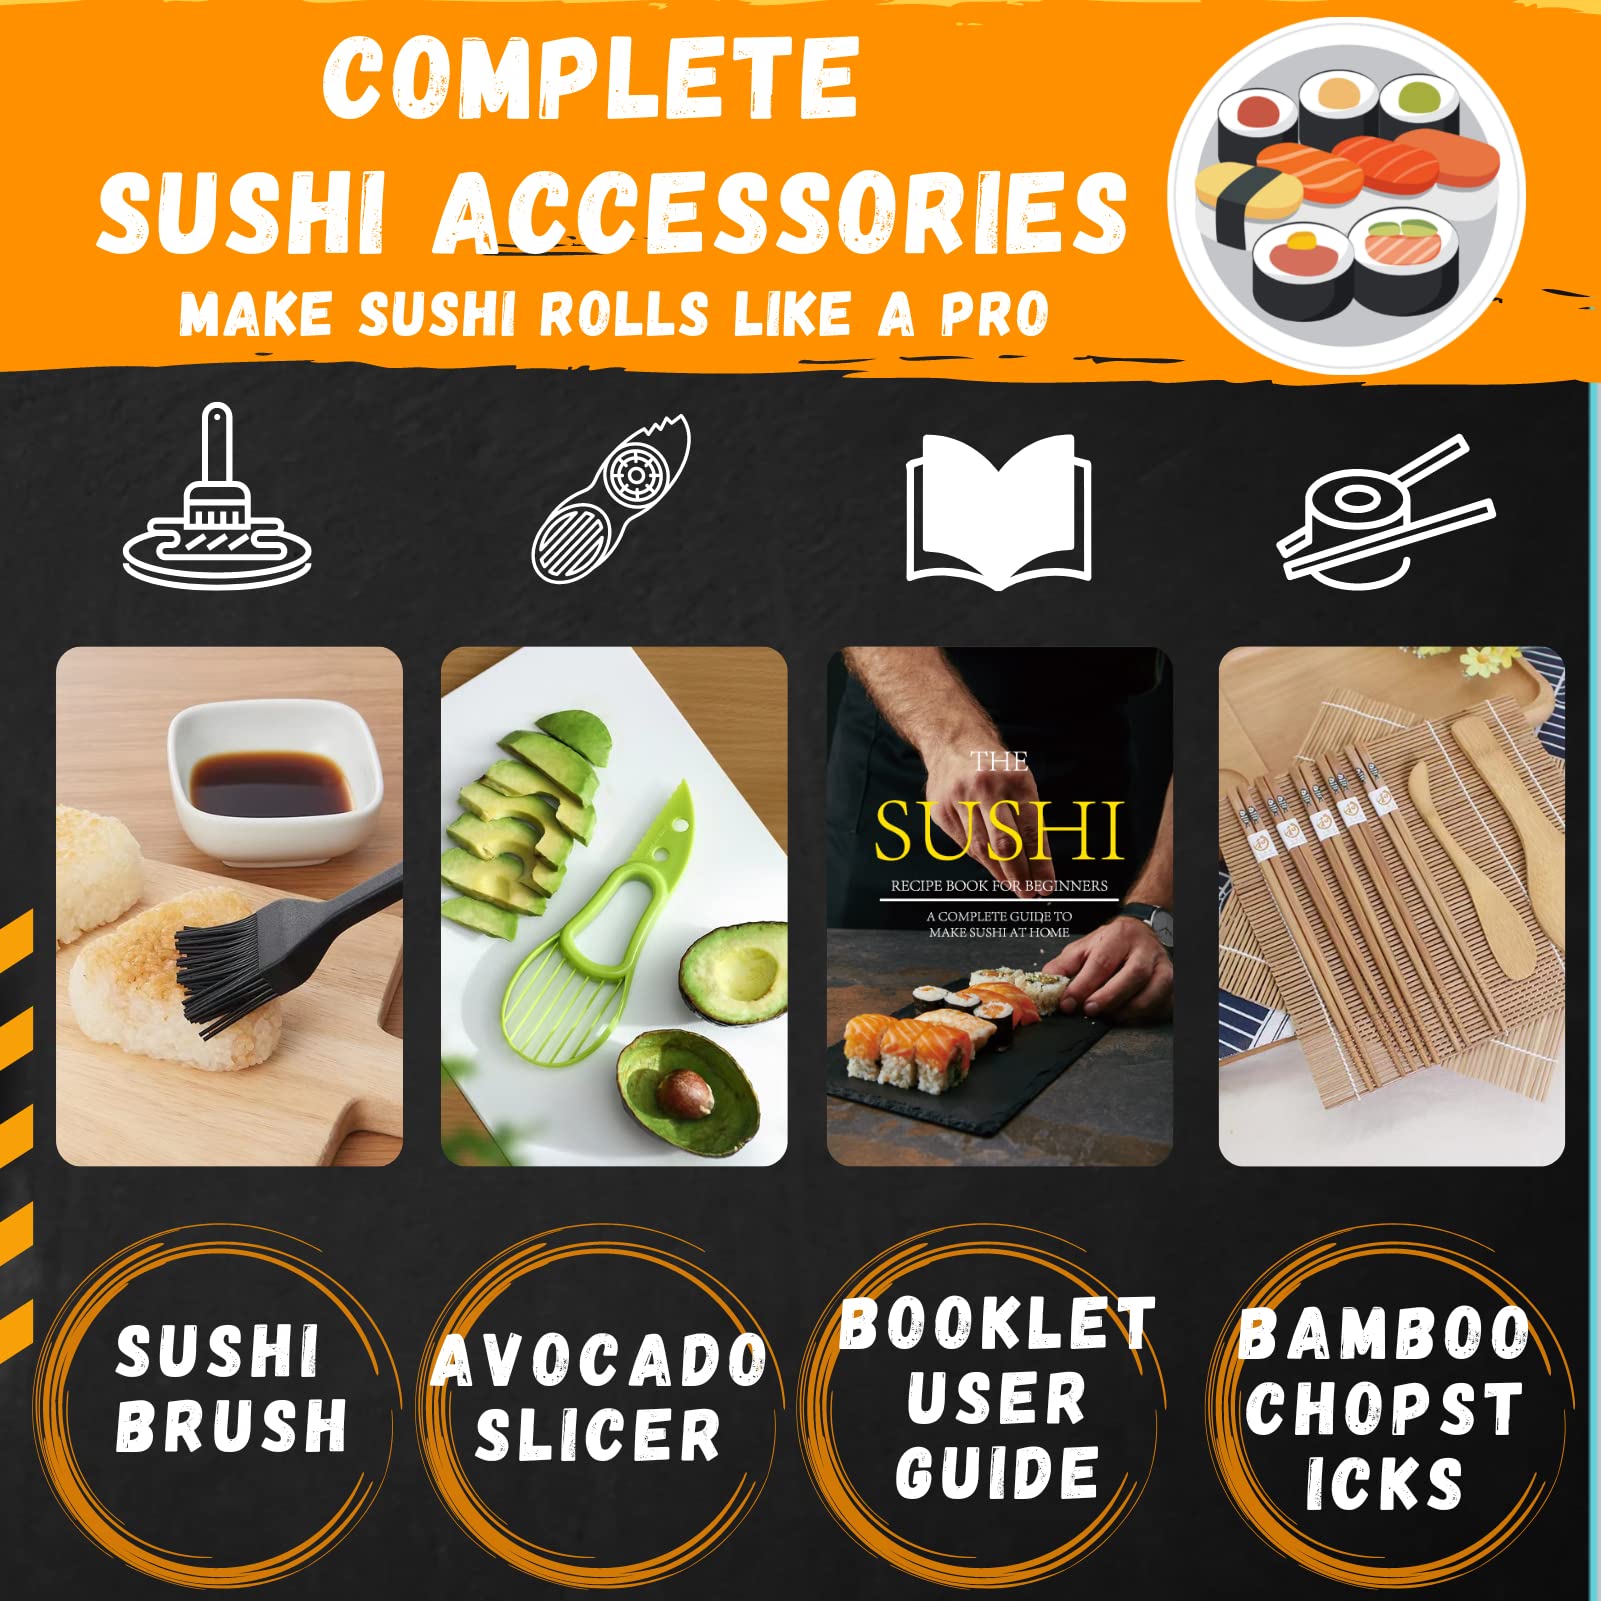 CHOMKIT Sushi Making Kit for Beginners, 25 in 1 Sushi Bazooka Kit with Sushi Mat, Sushi Mold, Sushi Knife, Chopsticks with Guide Book, Deluxe Edition DIY Sushi Machine for Kids